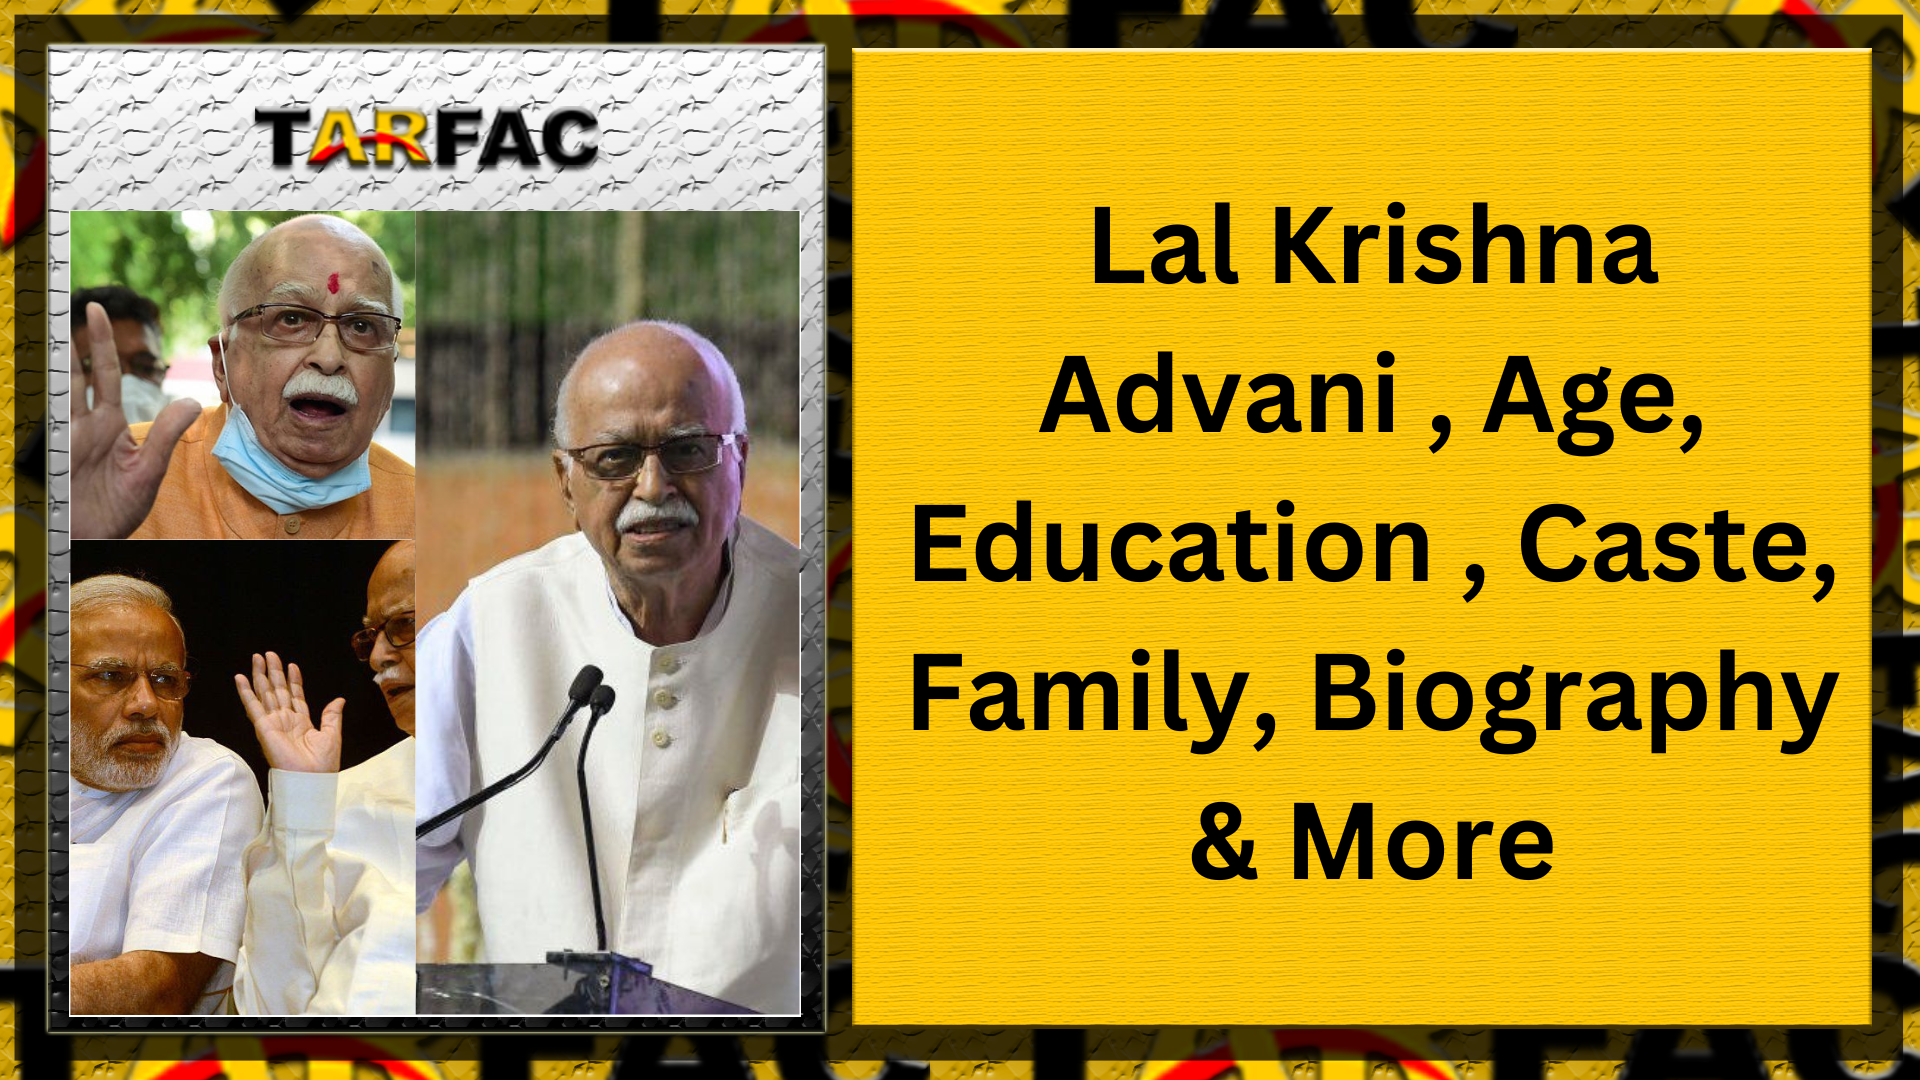 You are currently viewing Lal Krishna Advani , Age, Education , Caste, Family, Biography & More